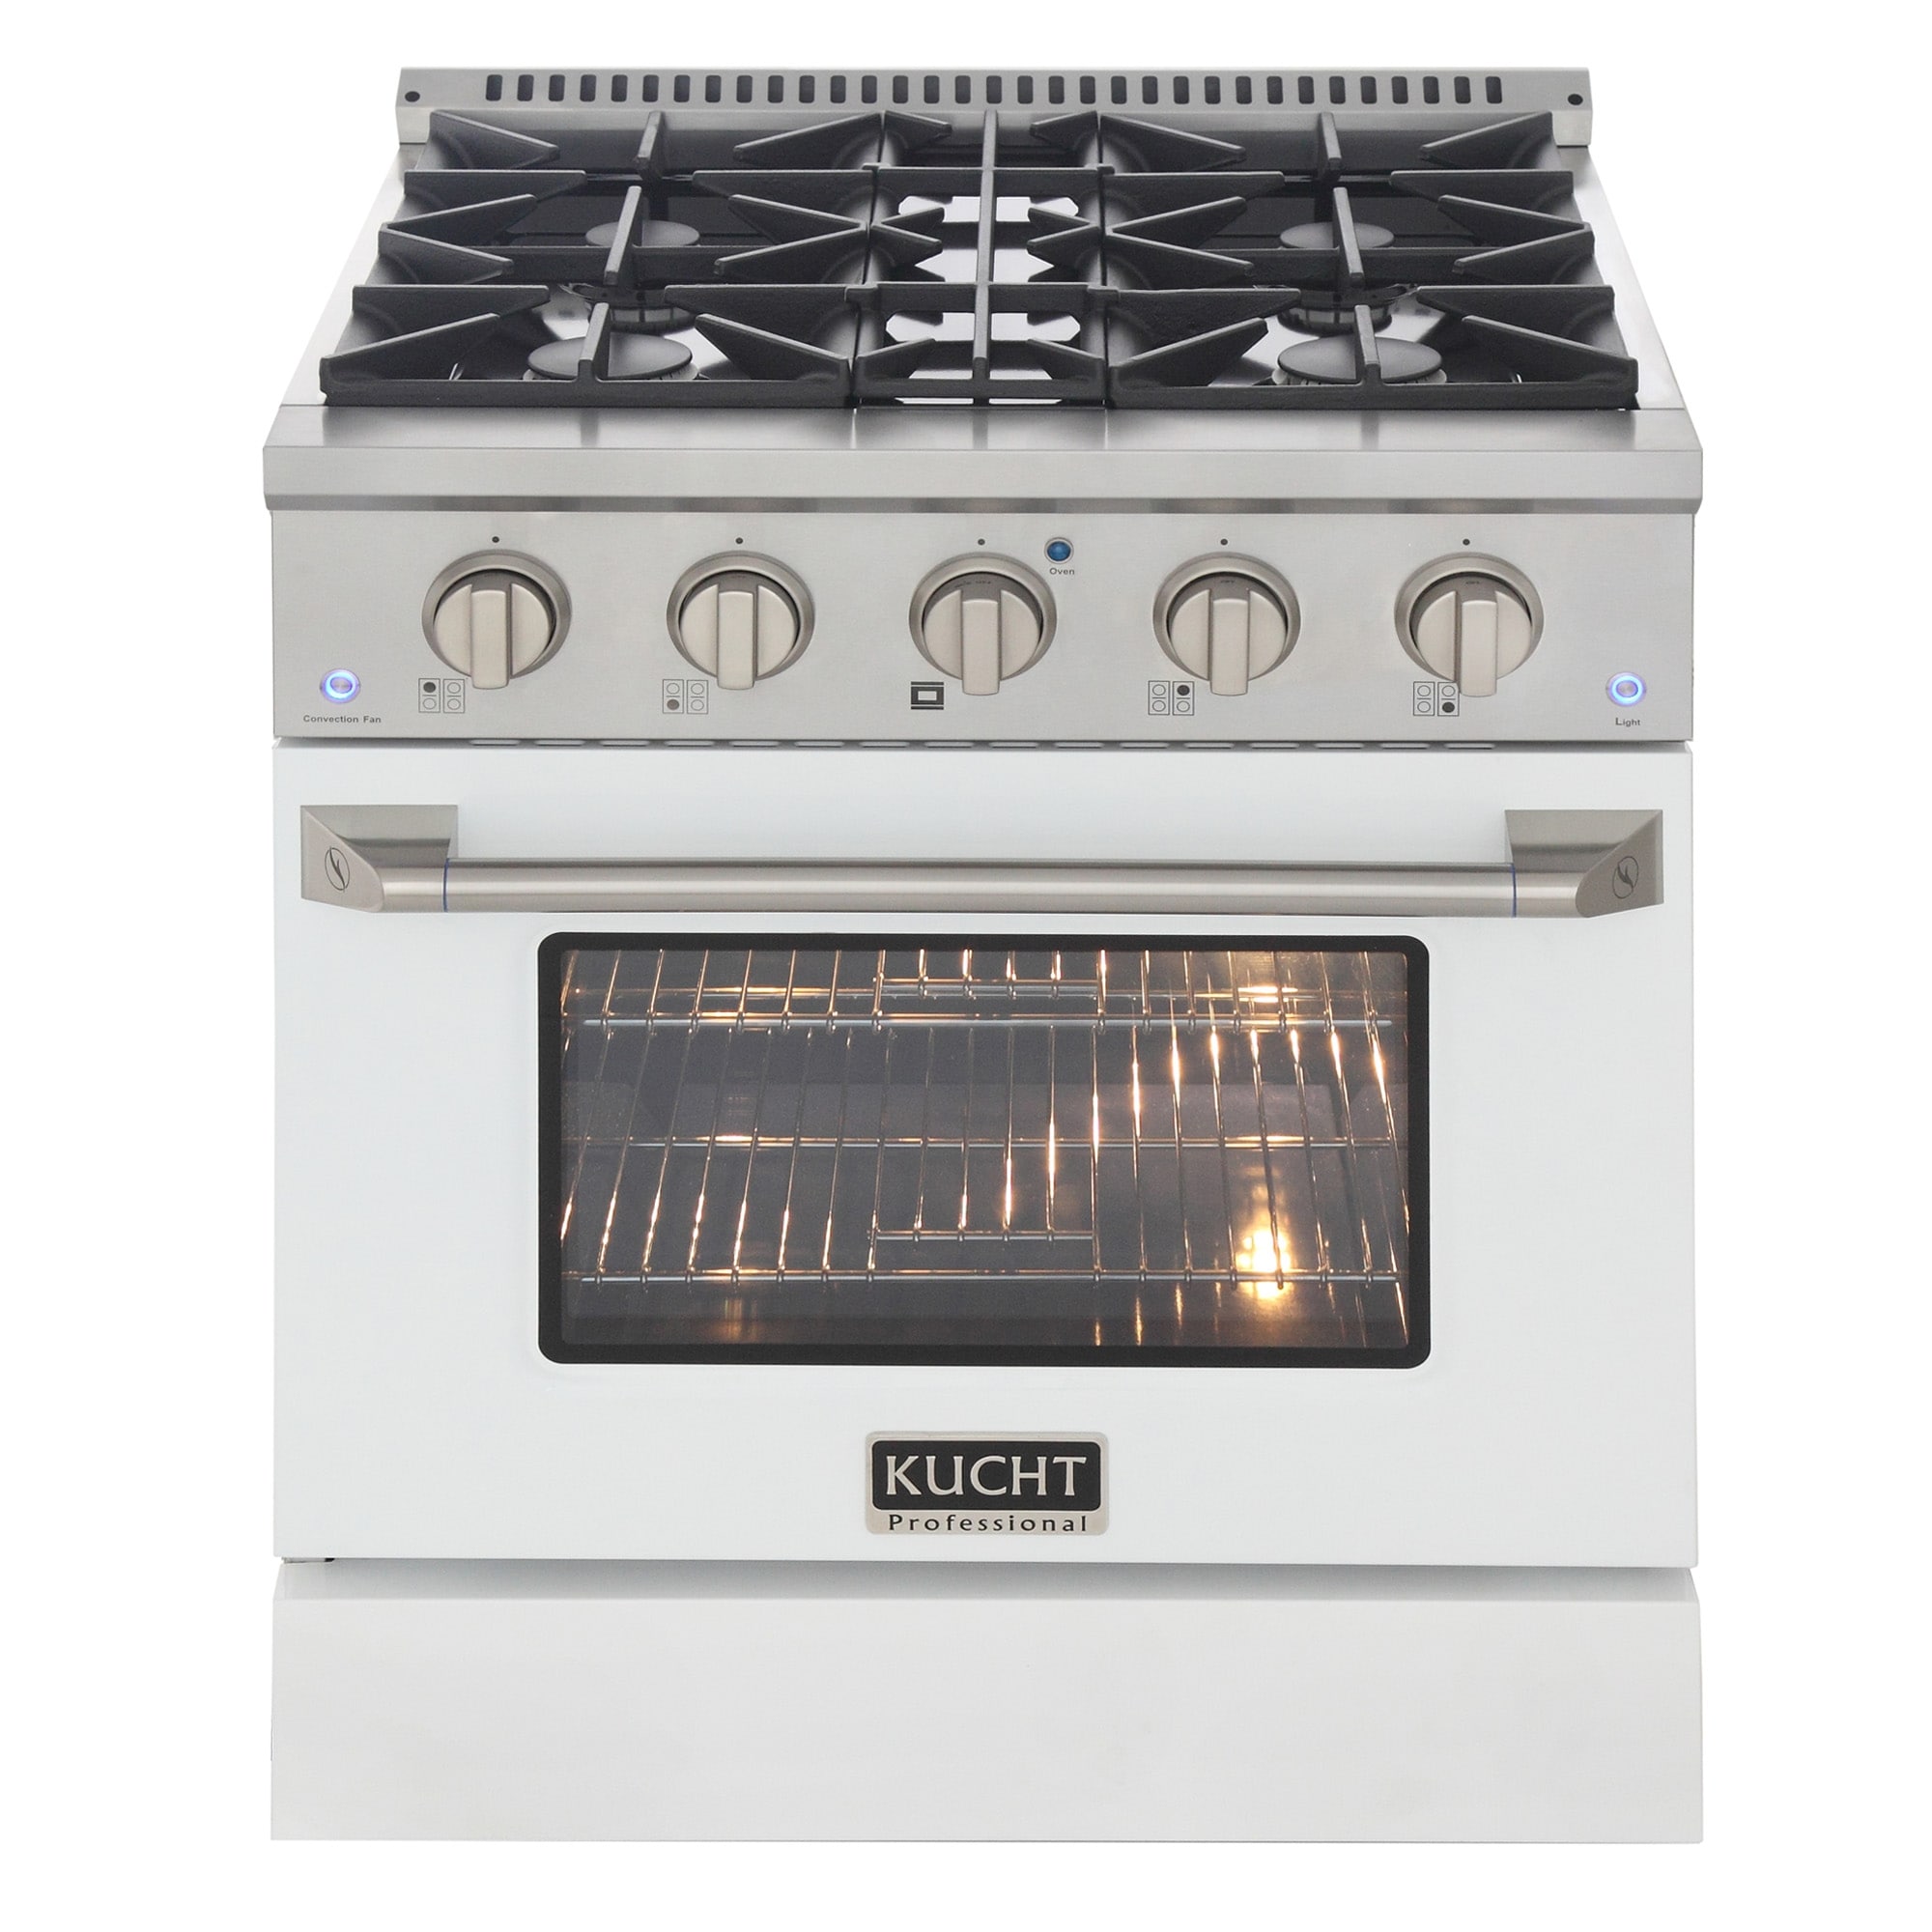 Cosmo 30 in. Freestanding GAS Range with 5 Sealed Burners and 4.5 Cu. ft. Convection Oven in Stainless Steel